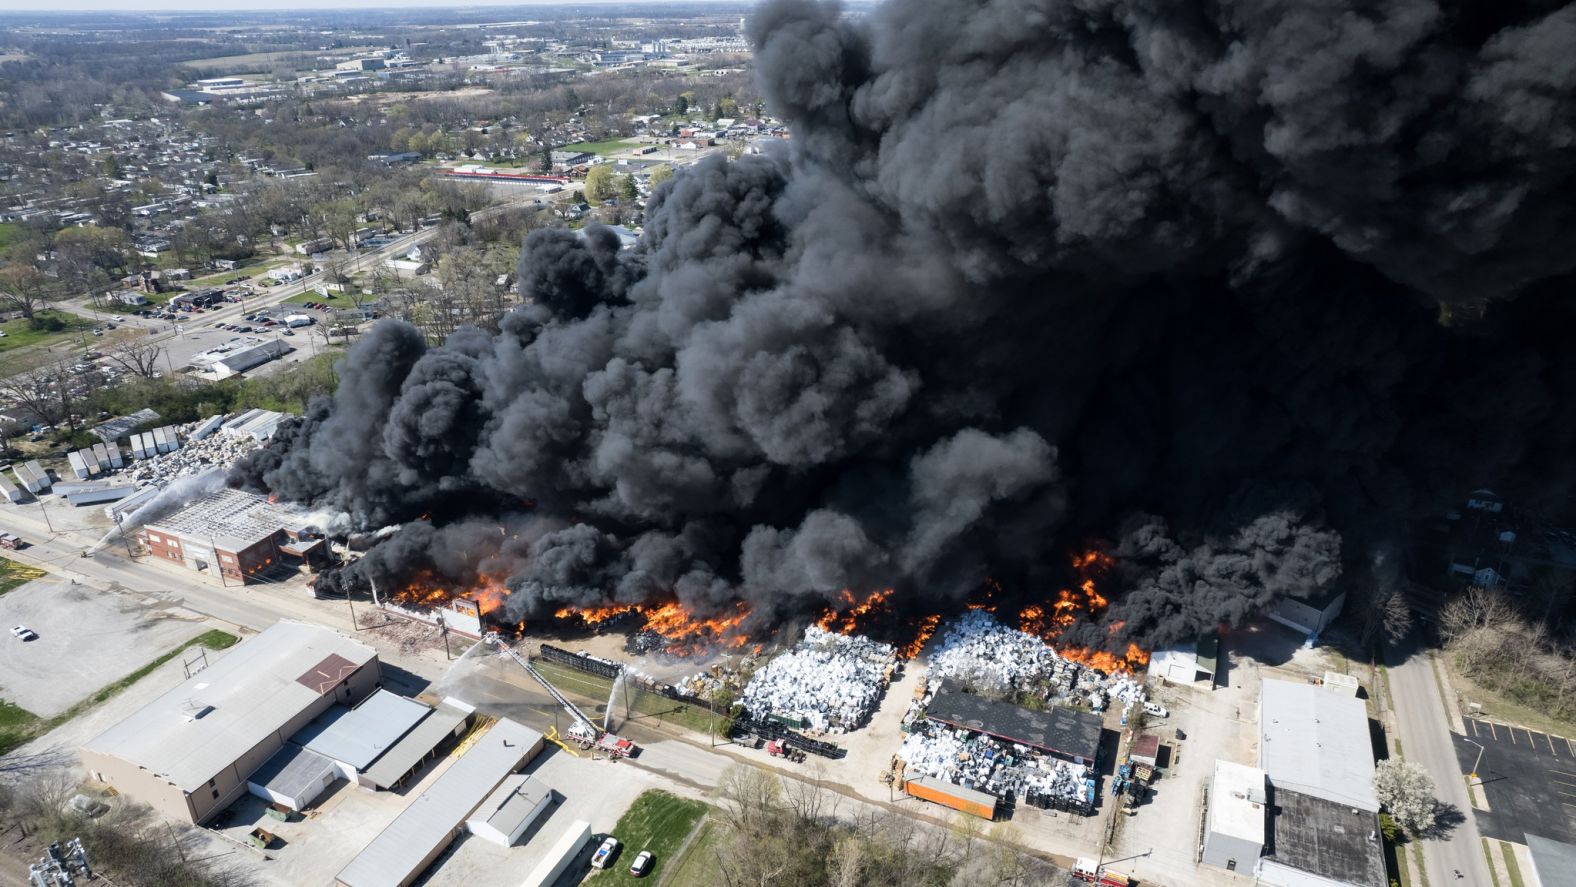 A recycling plant burns in Richmond, Indiana, on Tuesday, April 11. <a href="https://www.cnn.com/2023/04/13/us/richmond-indiana-recycling-plant-fire-thursday/index.html" target="_blank">The toxic smoke from the fire</a> forced thousands of people to evacuate. Public schools were also closed. It's not yet clear what sparked the inferno.